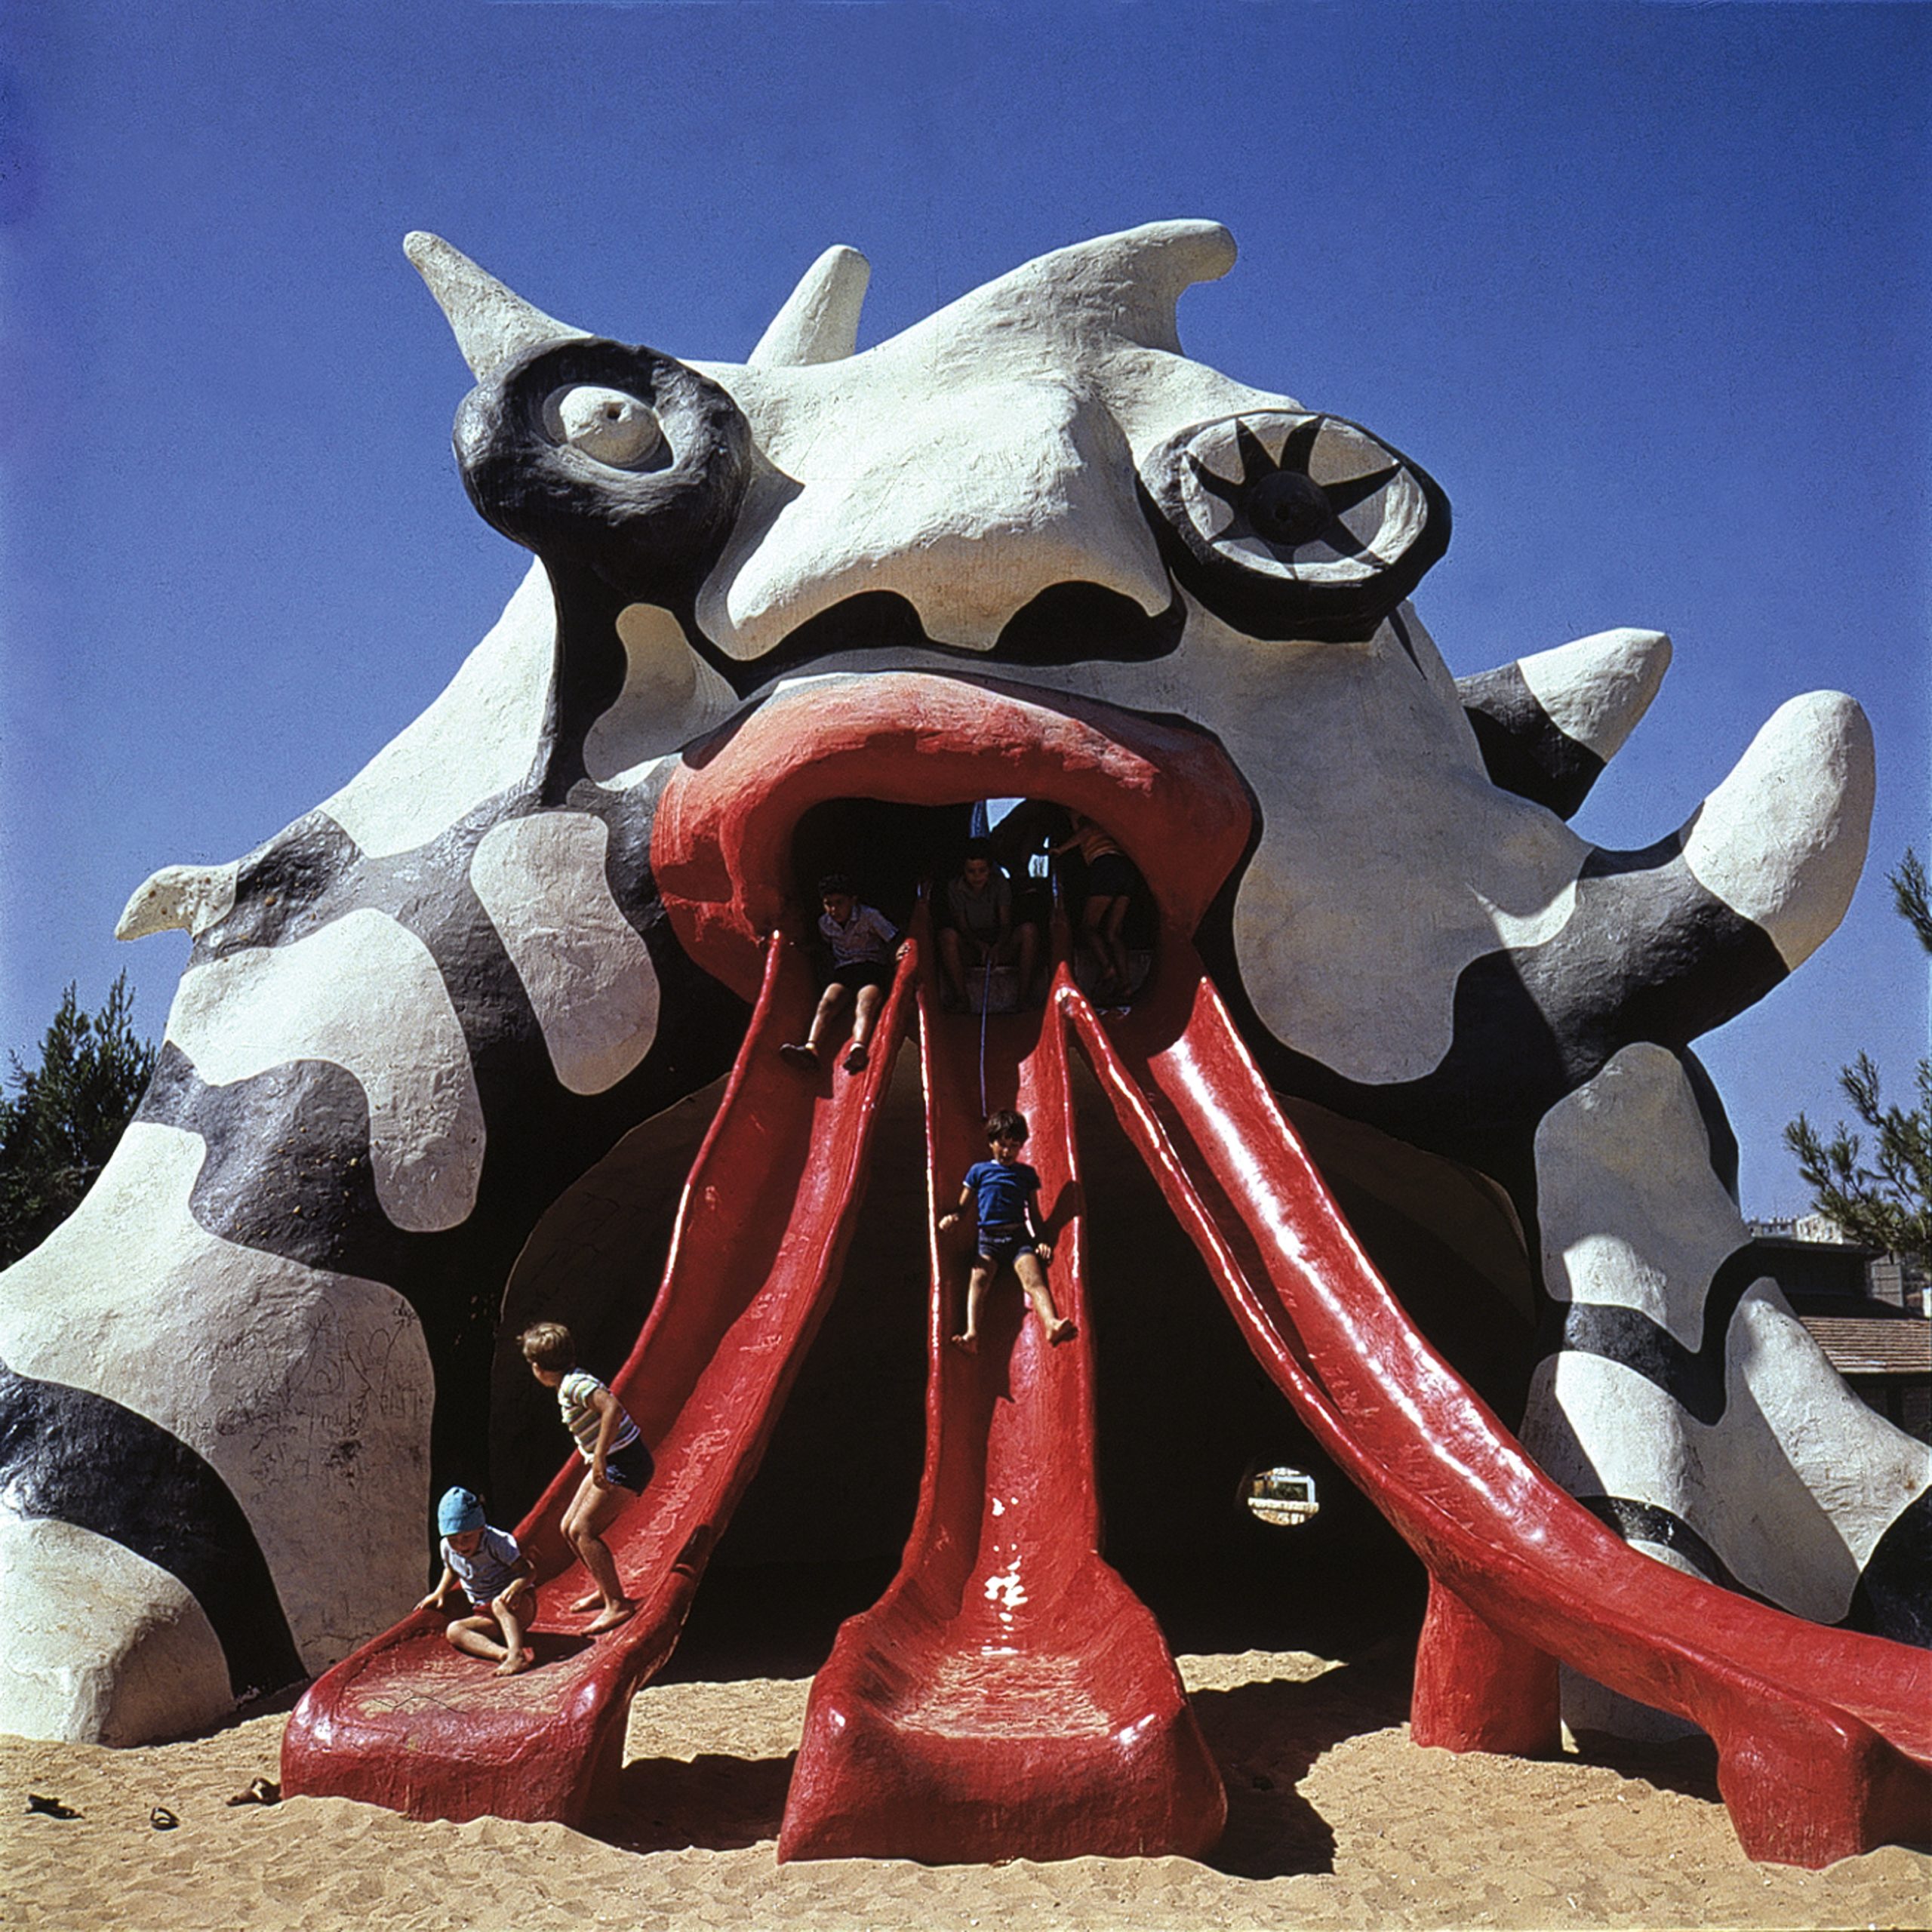 color photo of the finished Golem sculpture with children on the slides